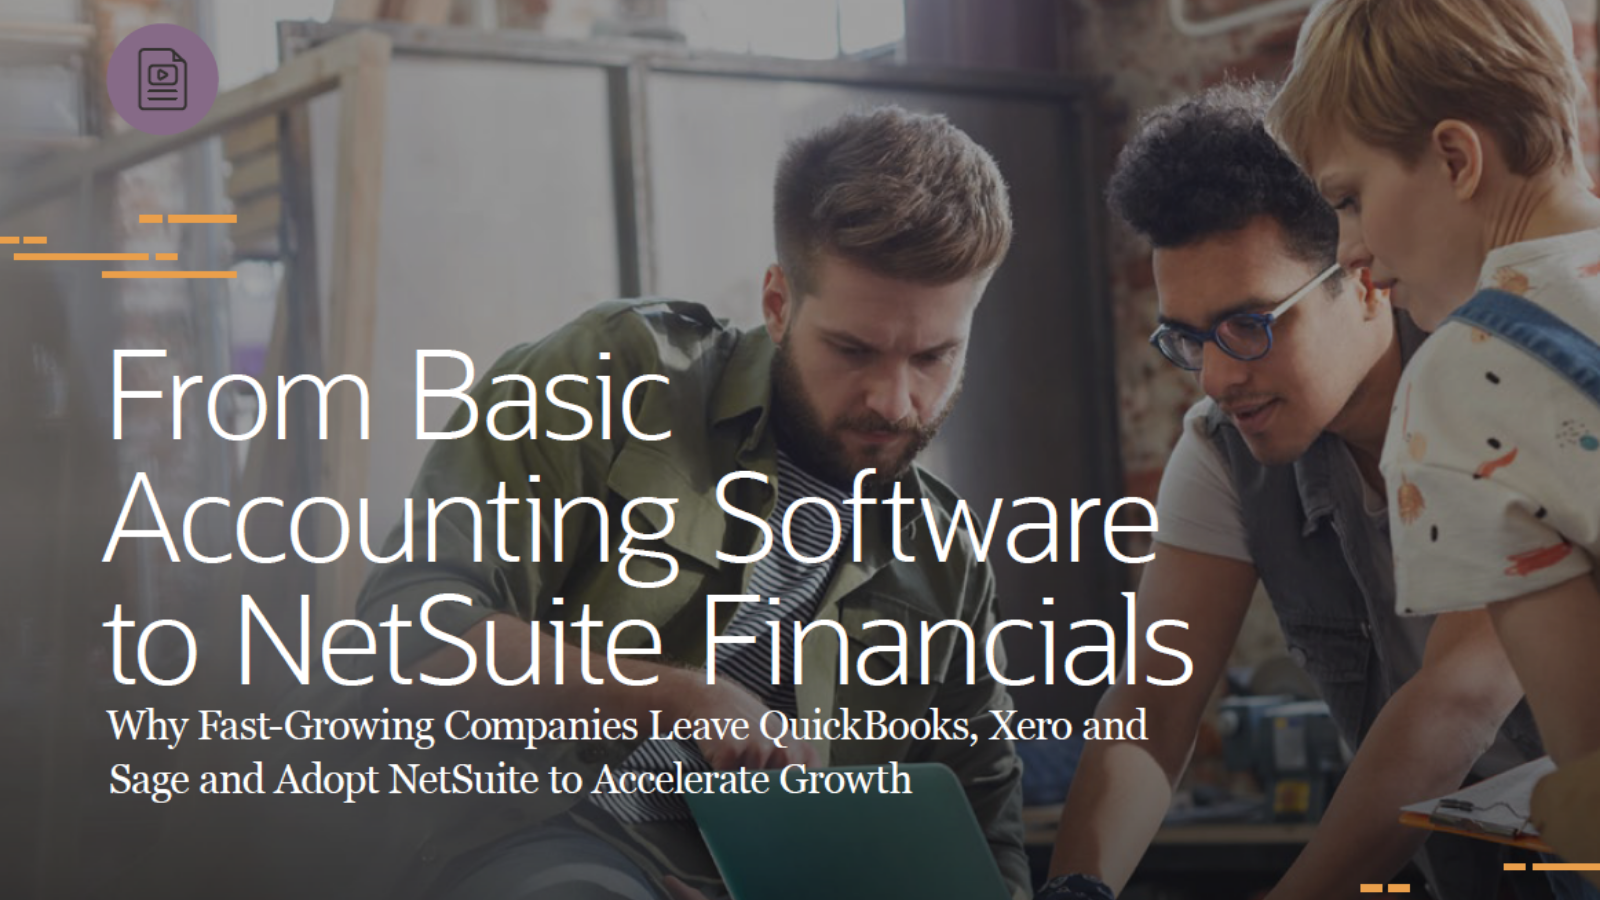 From Basic Accounting Software to NetSuite Financials